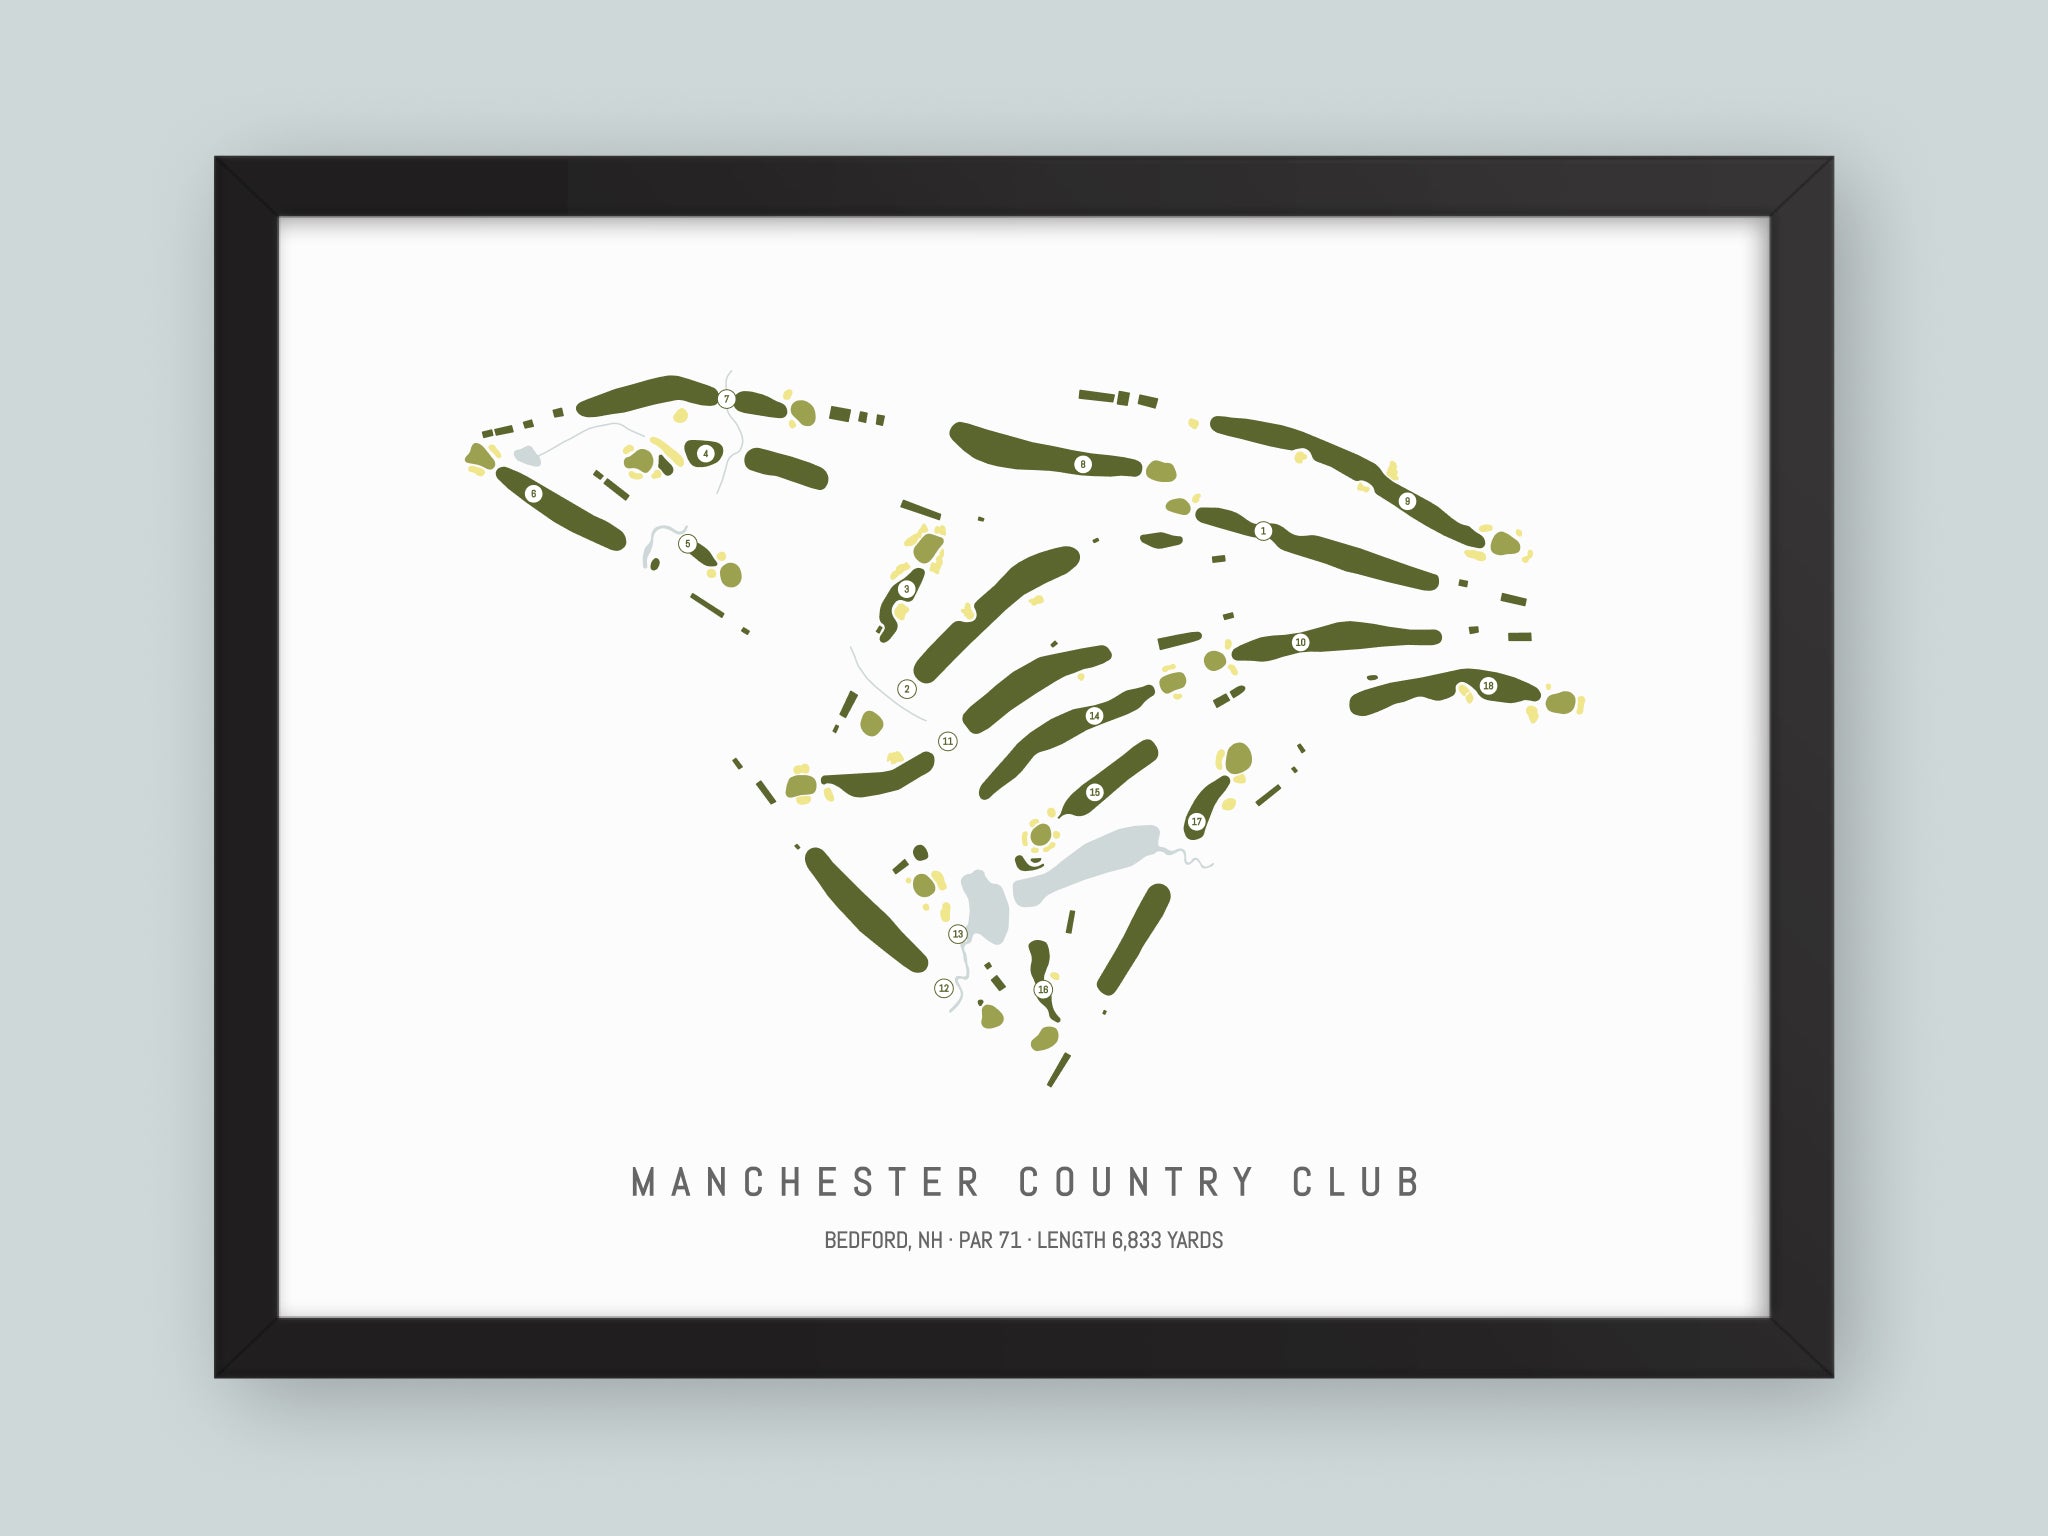 Manchester-Country-Club-NH--Black-Frame-24x18-With-Hole-Numbers